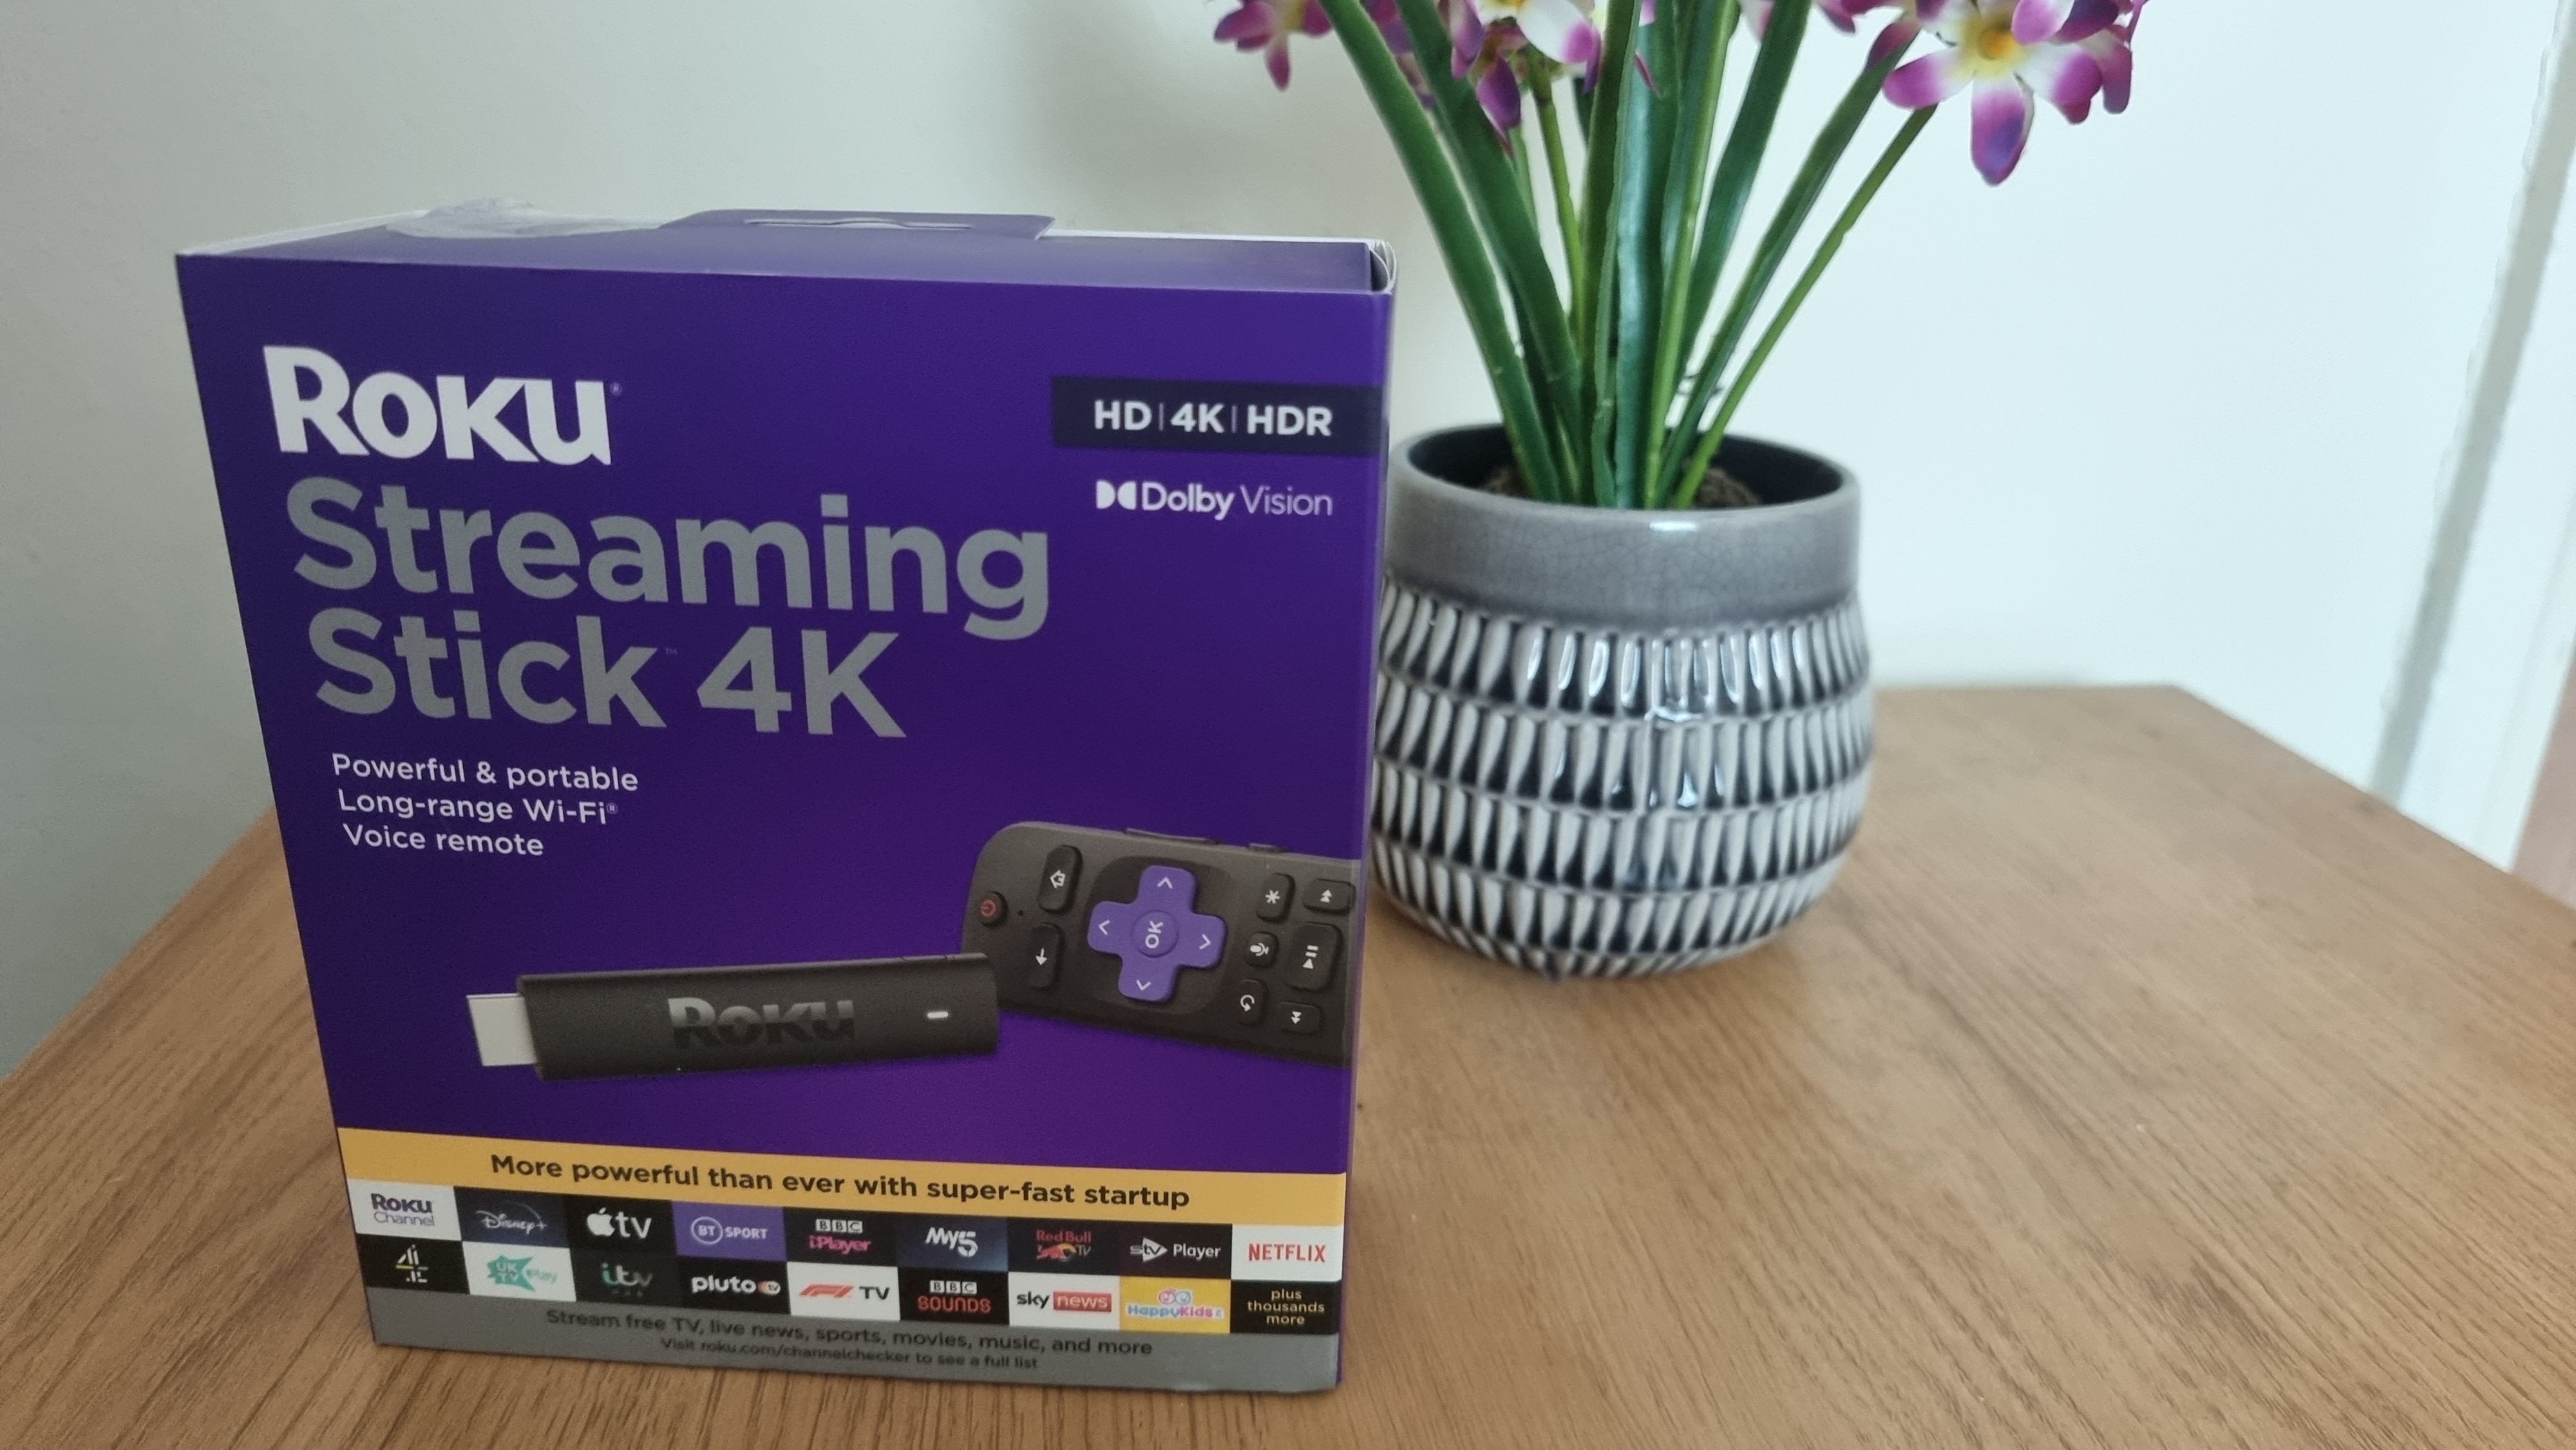 How to connect a Roku streaming stick to your TV